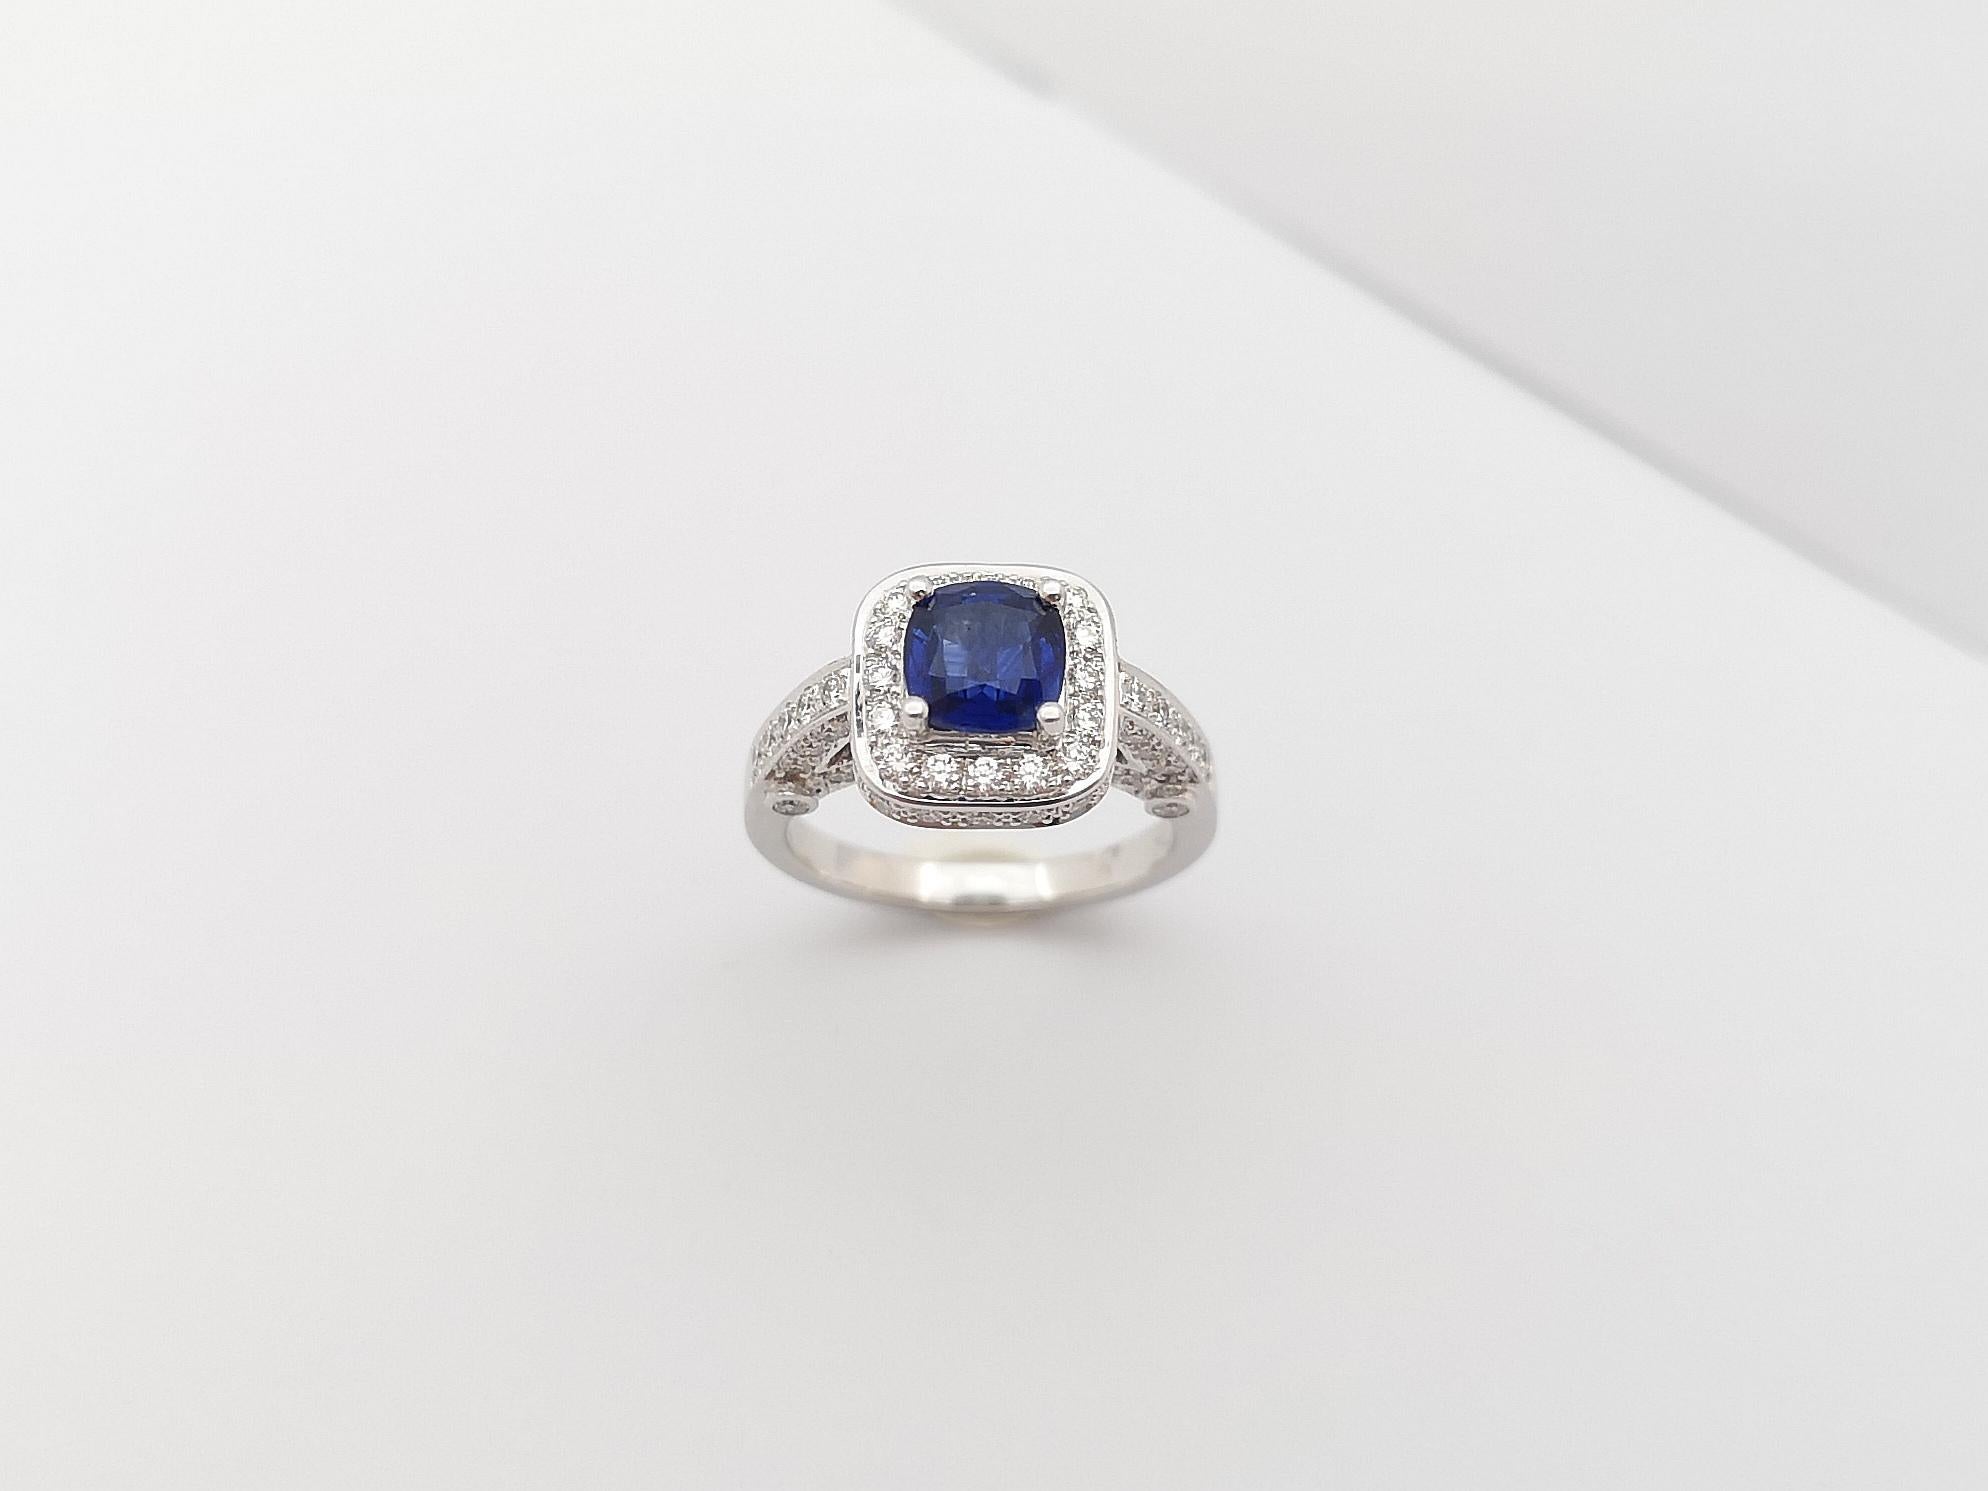 Certified Blue Sapphire with Diamond Ring Set in 18 Karat White Gold For Sale 8